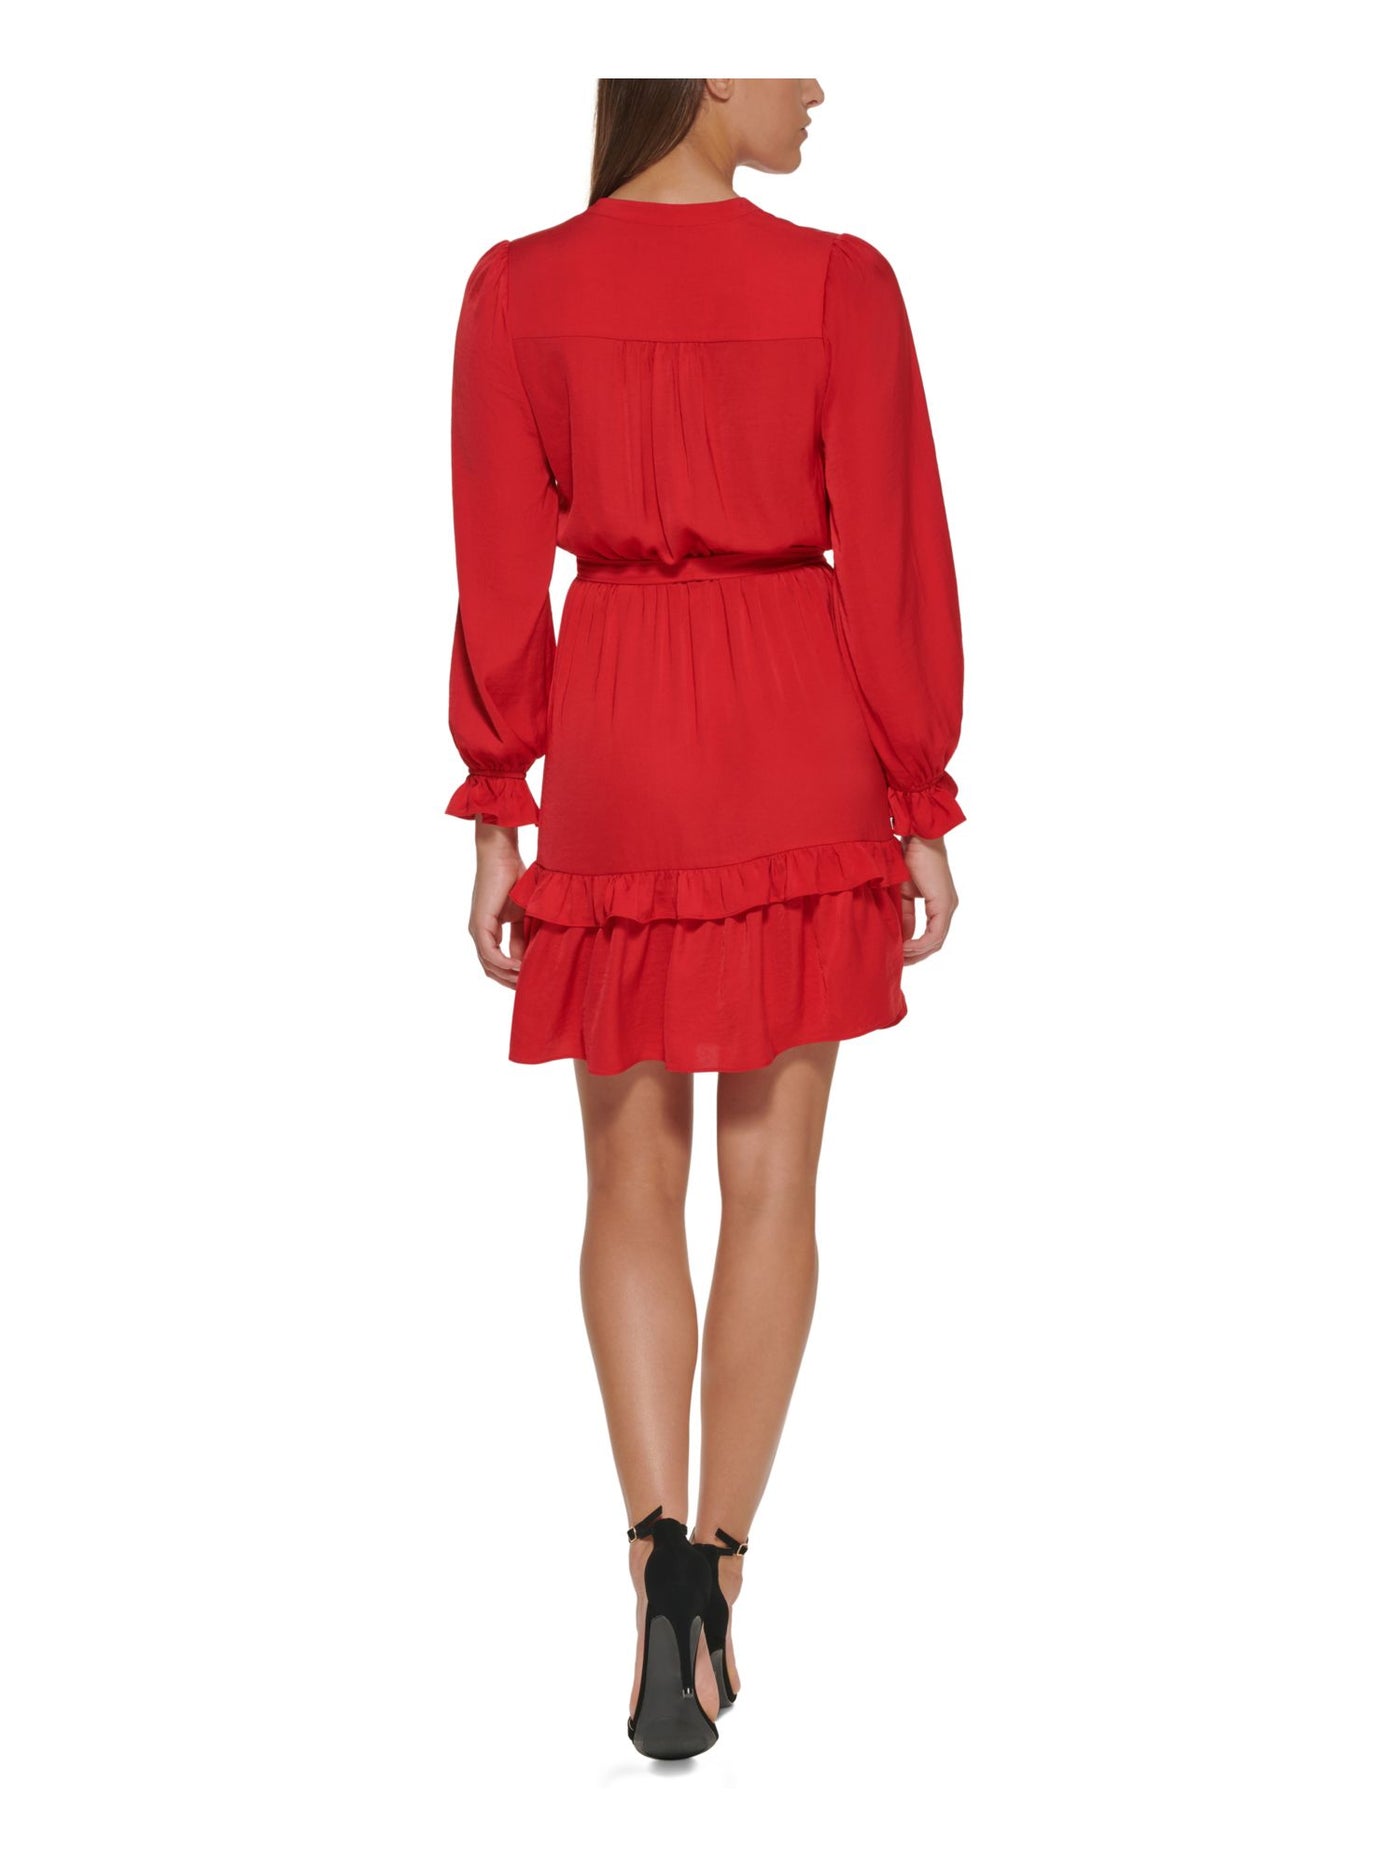 TOMMY HILFIGER Womens Red Ruffled Pull-on Style Blouson Sleeve Round Neck Above The Knee Party Shift Dress Petites 12P